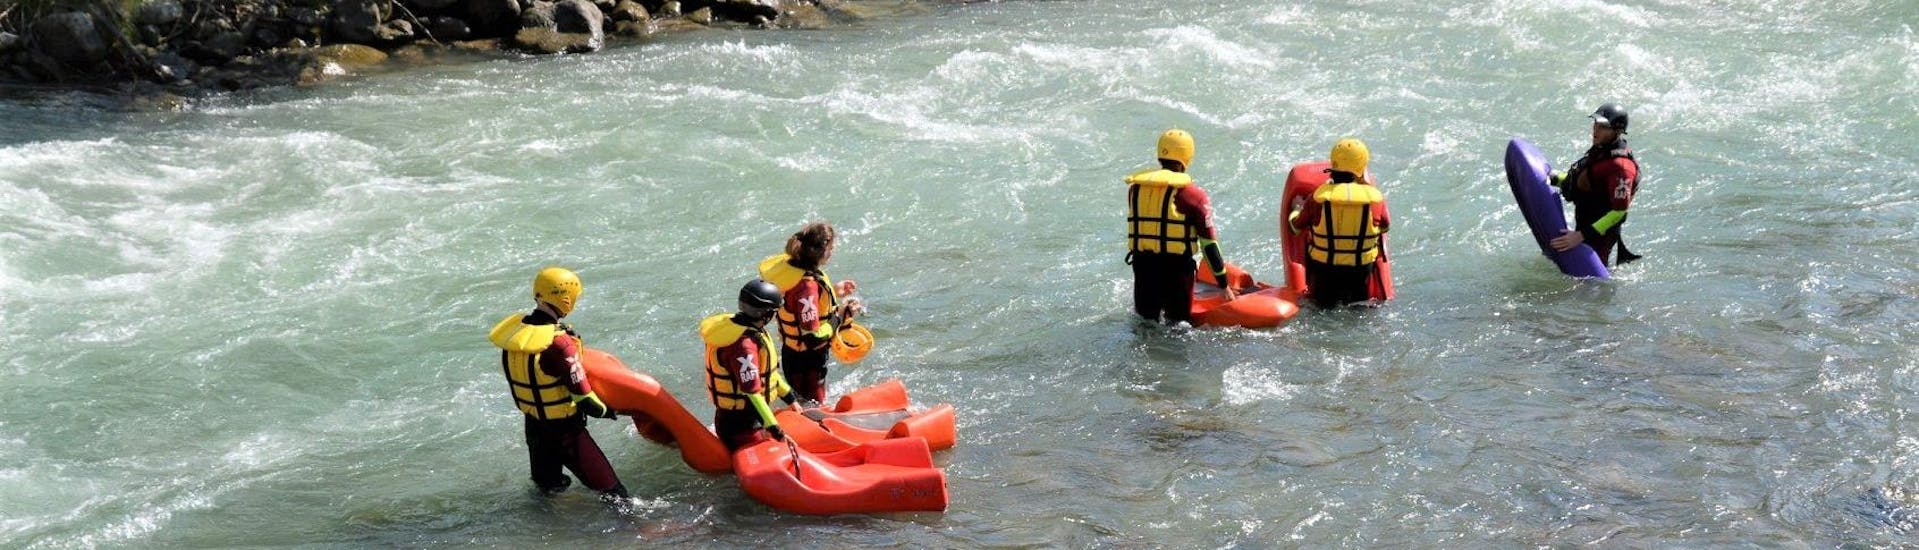 The participants of the Hydrospeed Strong on the river Noce are getting ready to enter the waterduring the activity organized by X Raft Val di Sole.